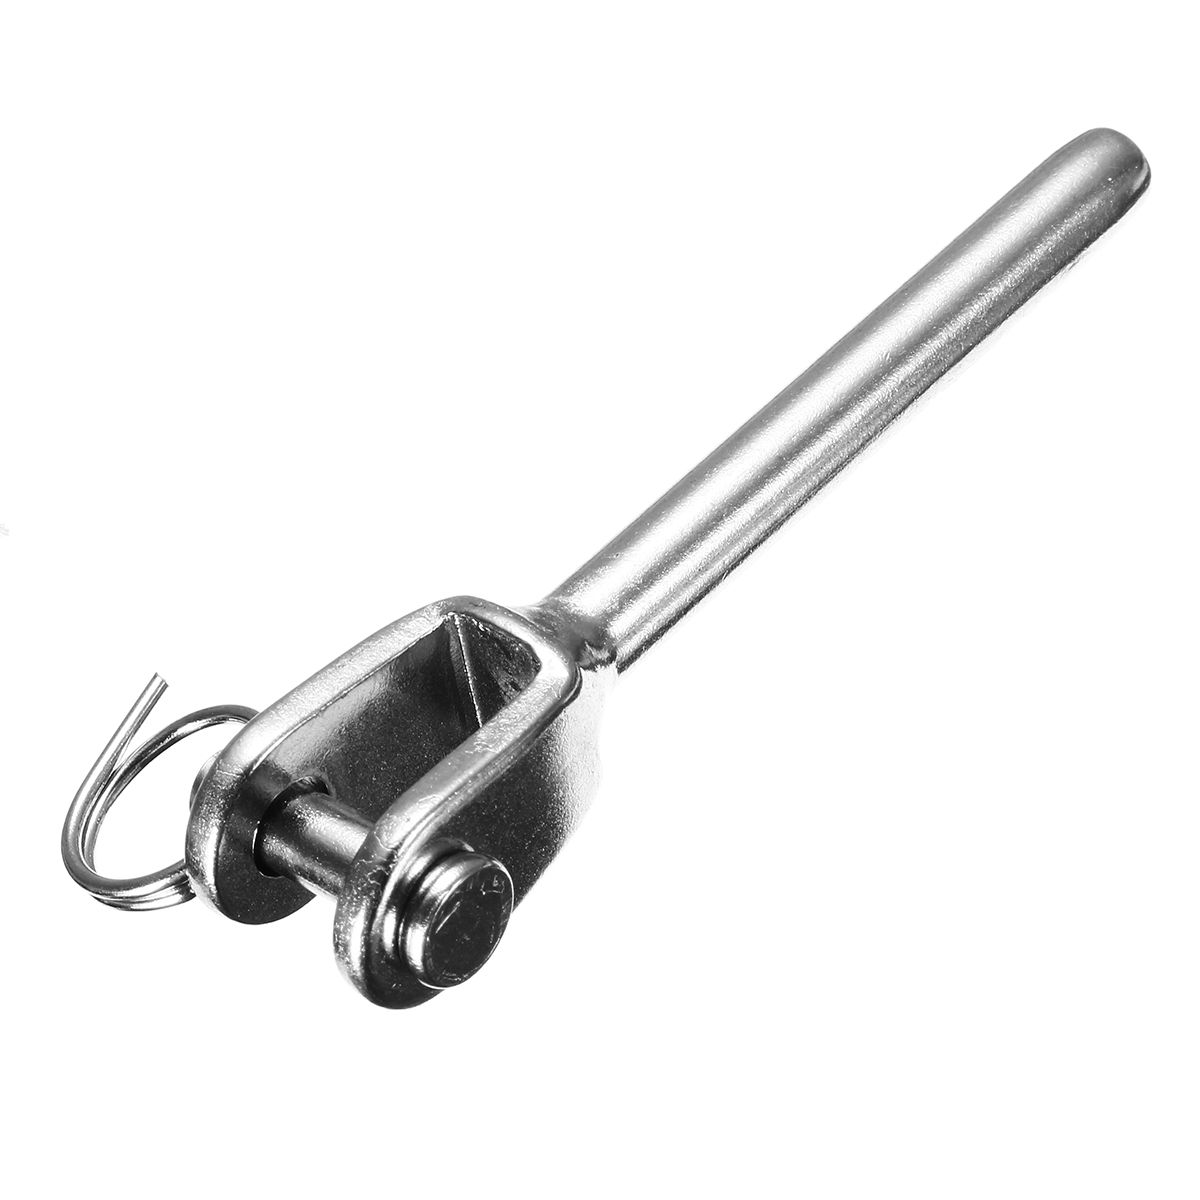 10-Sets-Stainless-Steel-Jaw-Swage-Stud-Turn-buckle-Balustrade-Rigging-for-18quot-Cable-Railing-Rail-1310902